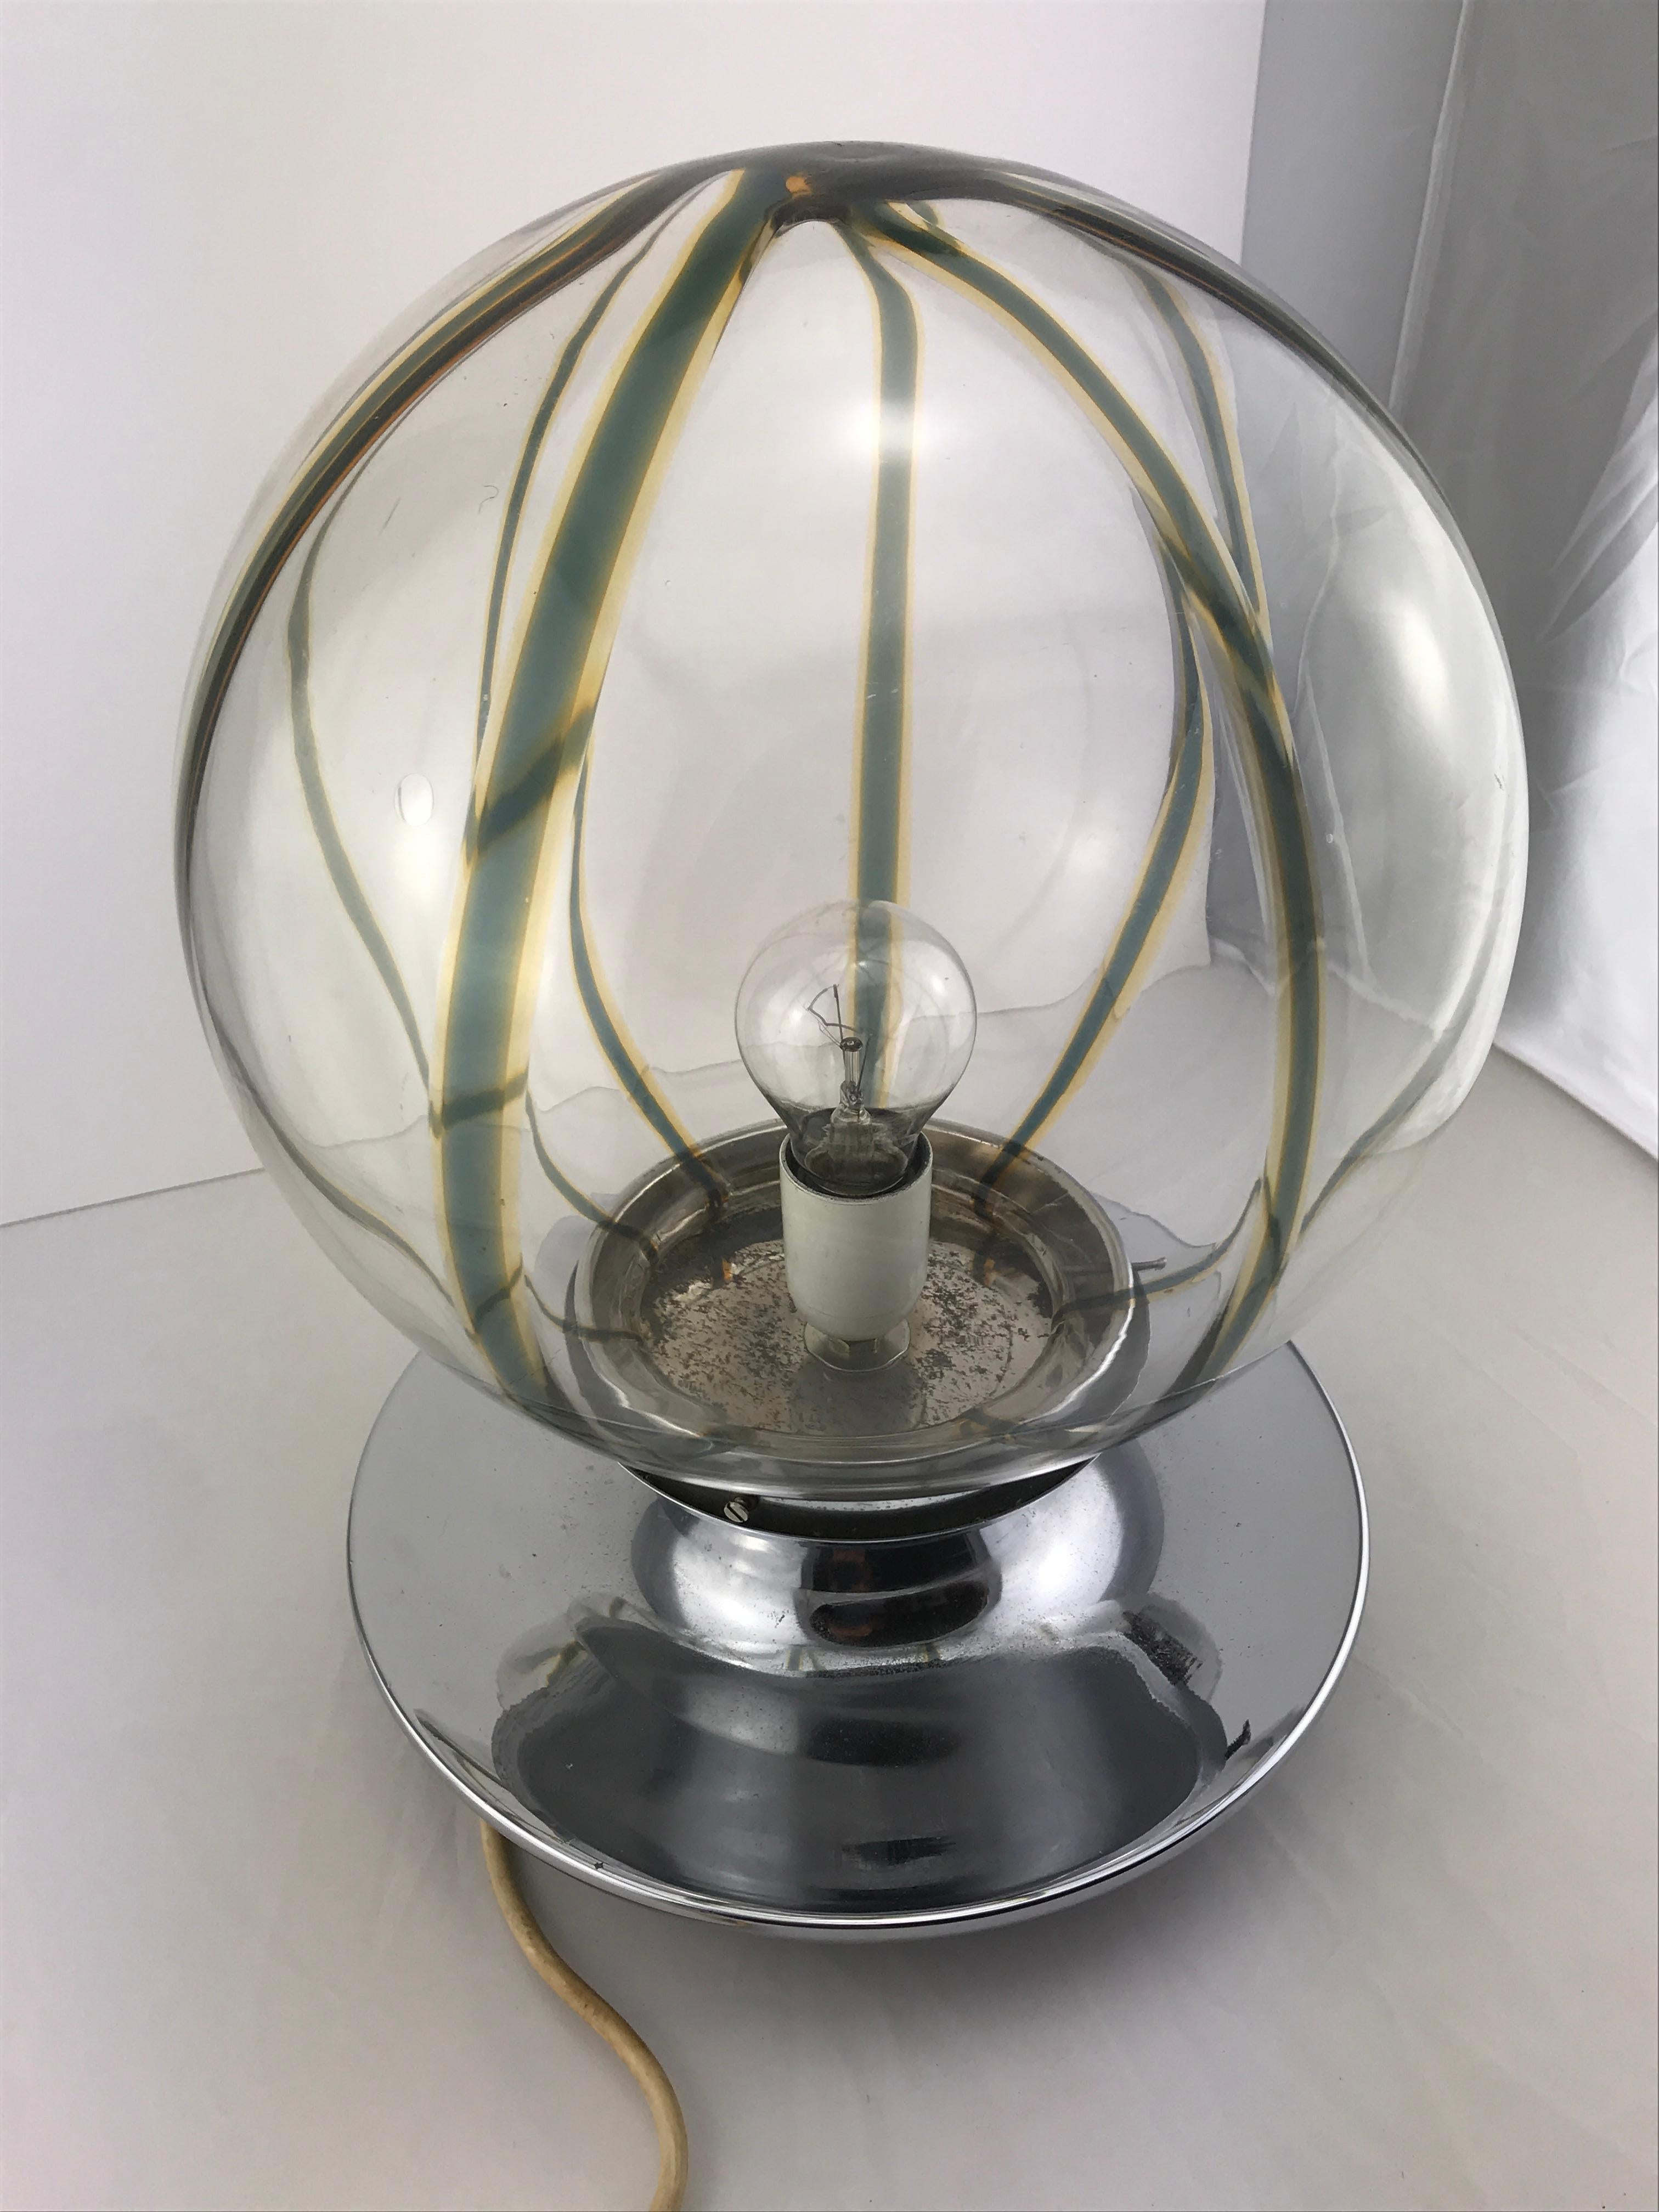  Italian Murano Glass Spherical Table Lamp In Chrome by Tony Zuccheri In Good Condition For Sale In Byron Bay, NSW